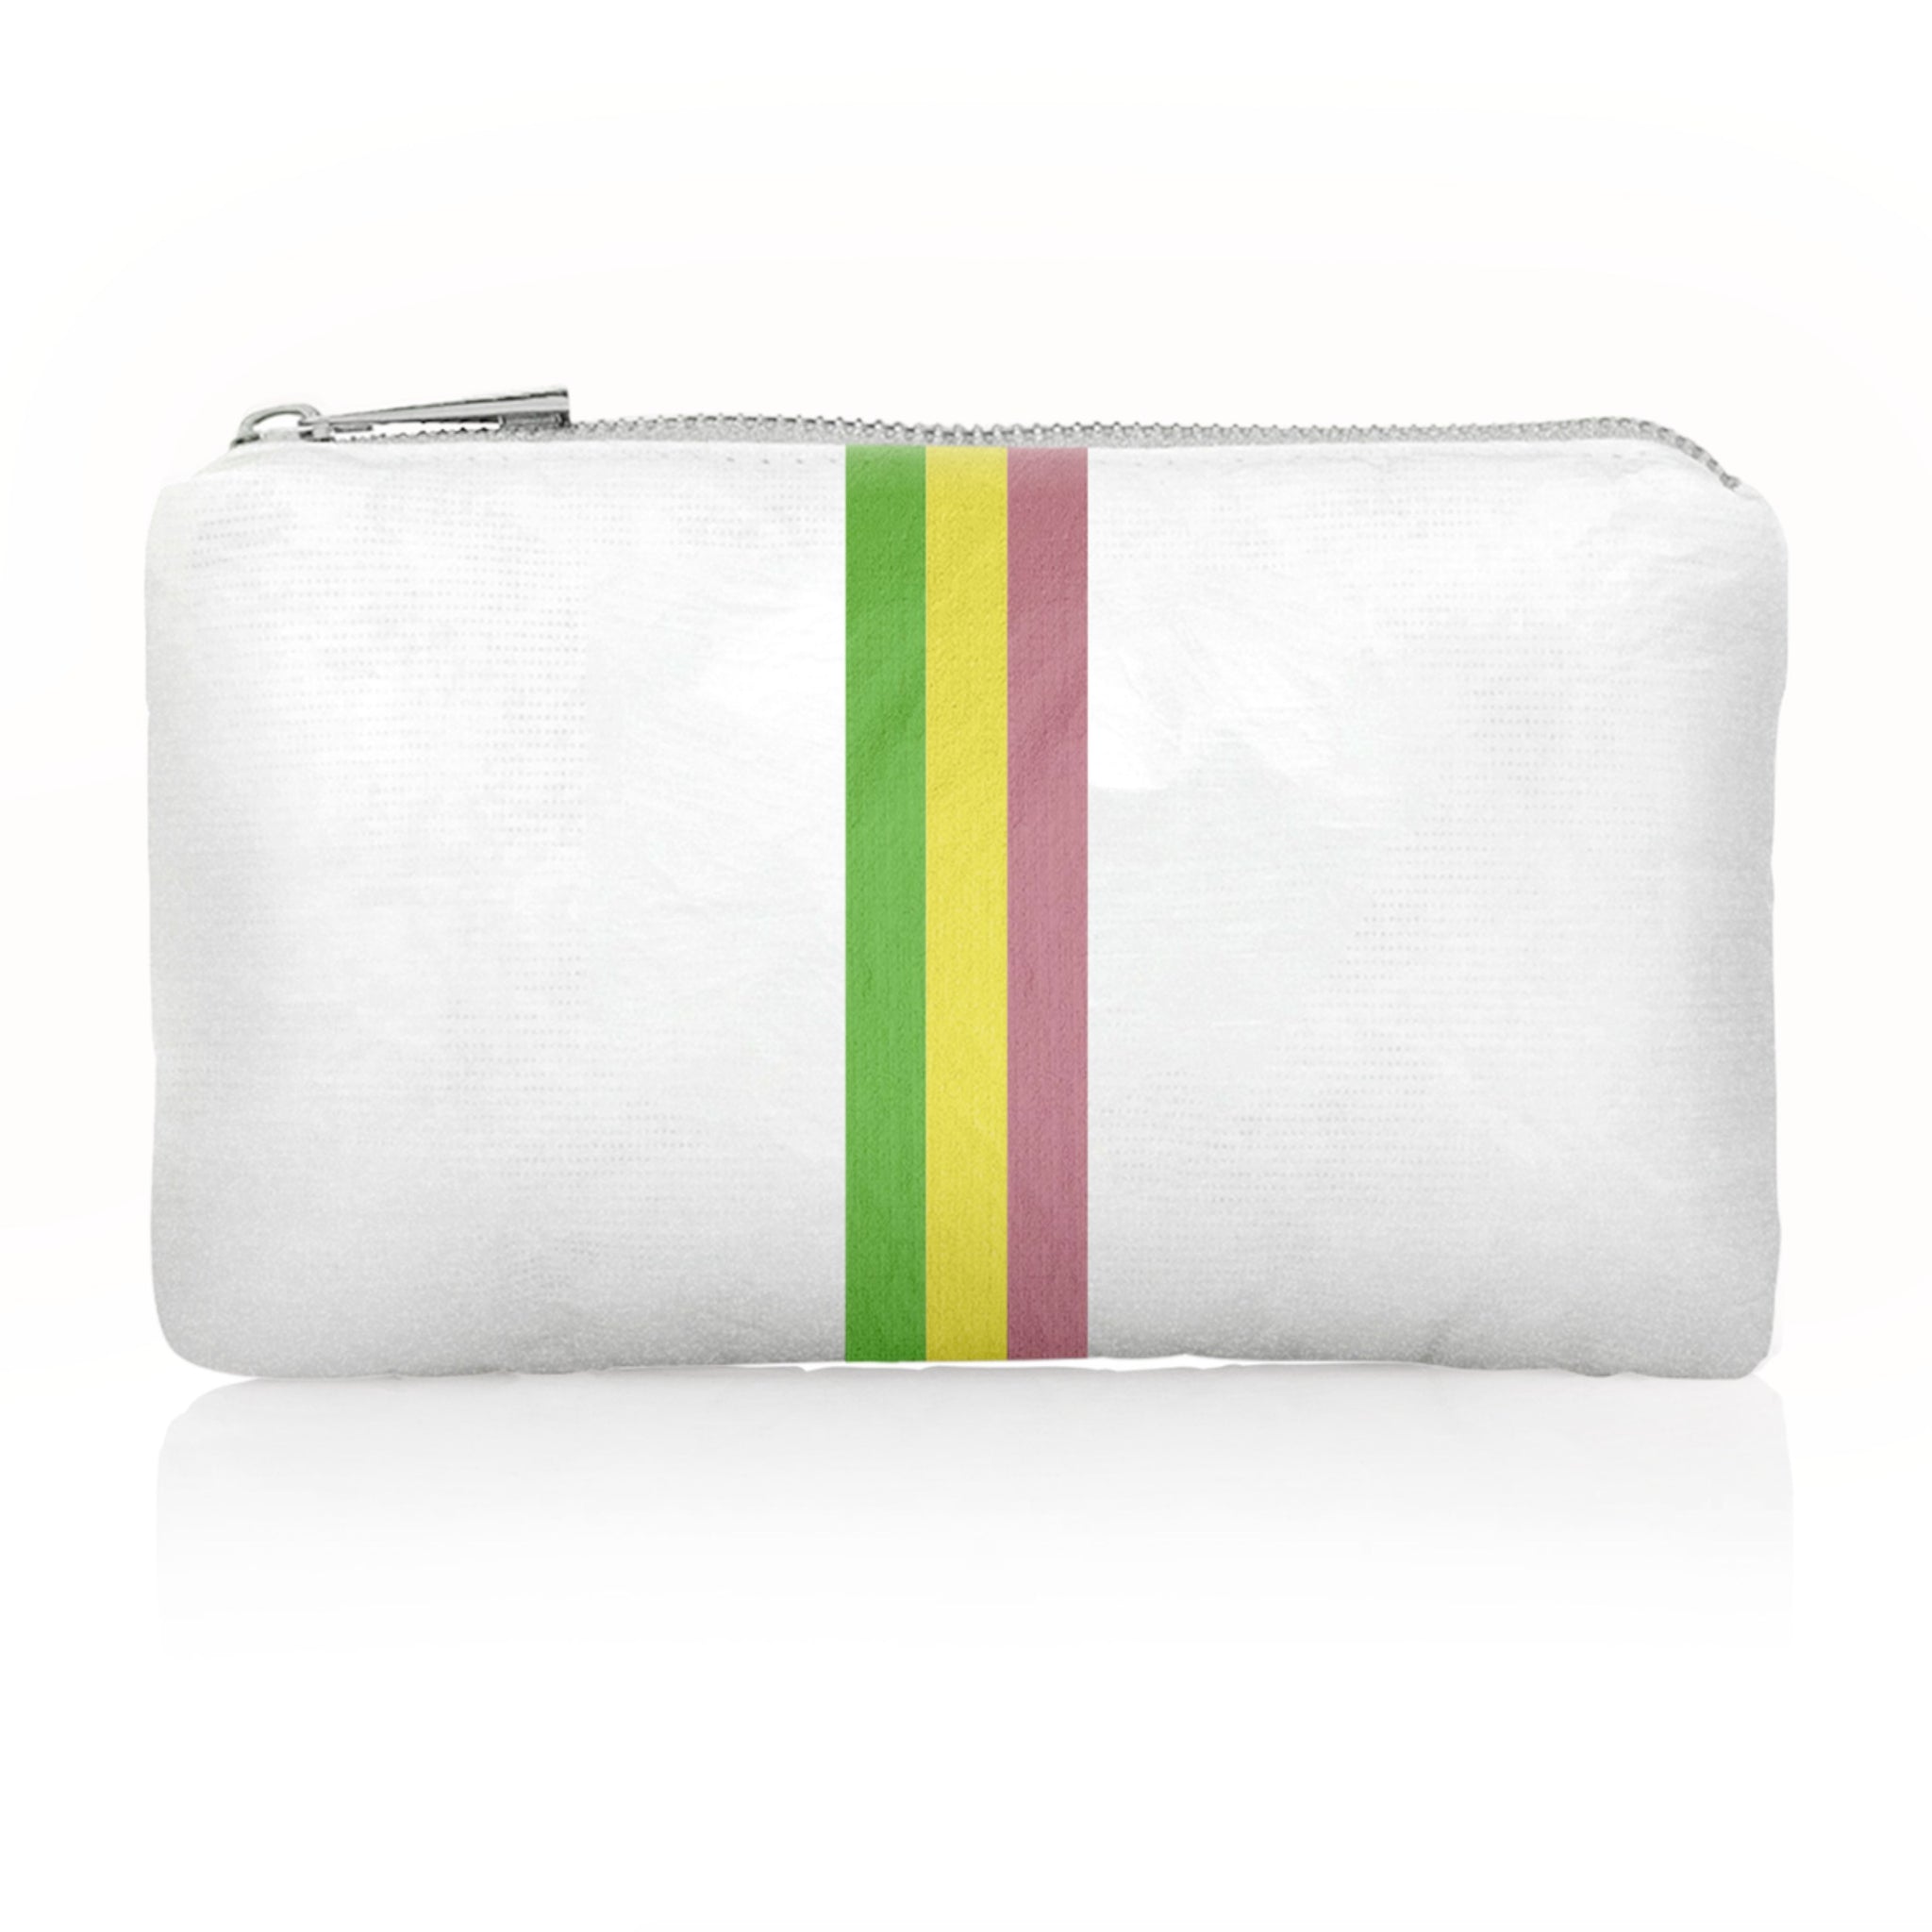 Mini Zipper Pack in Shimmer White with Colorful Green, Yellow, and Pink Stripes